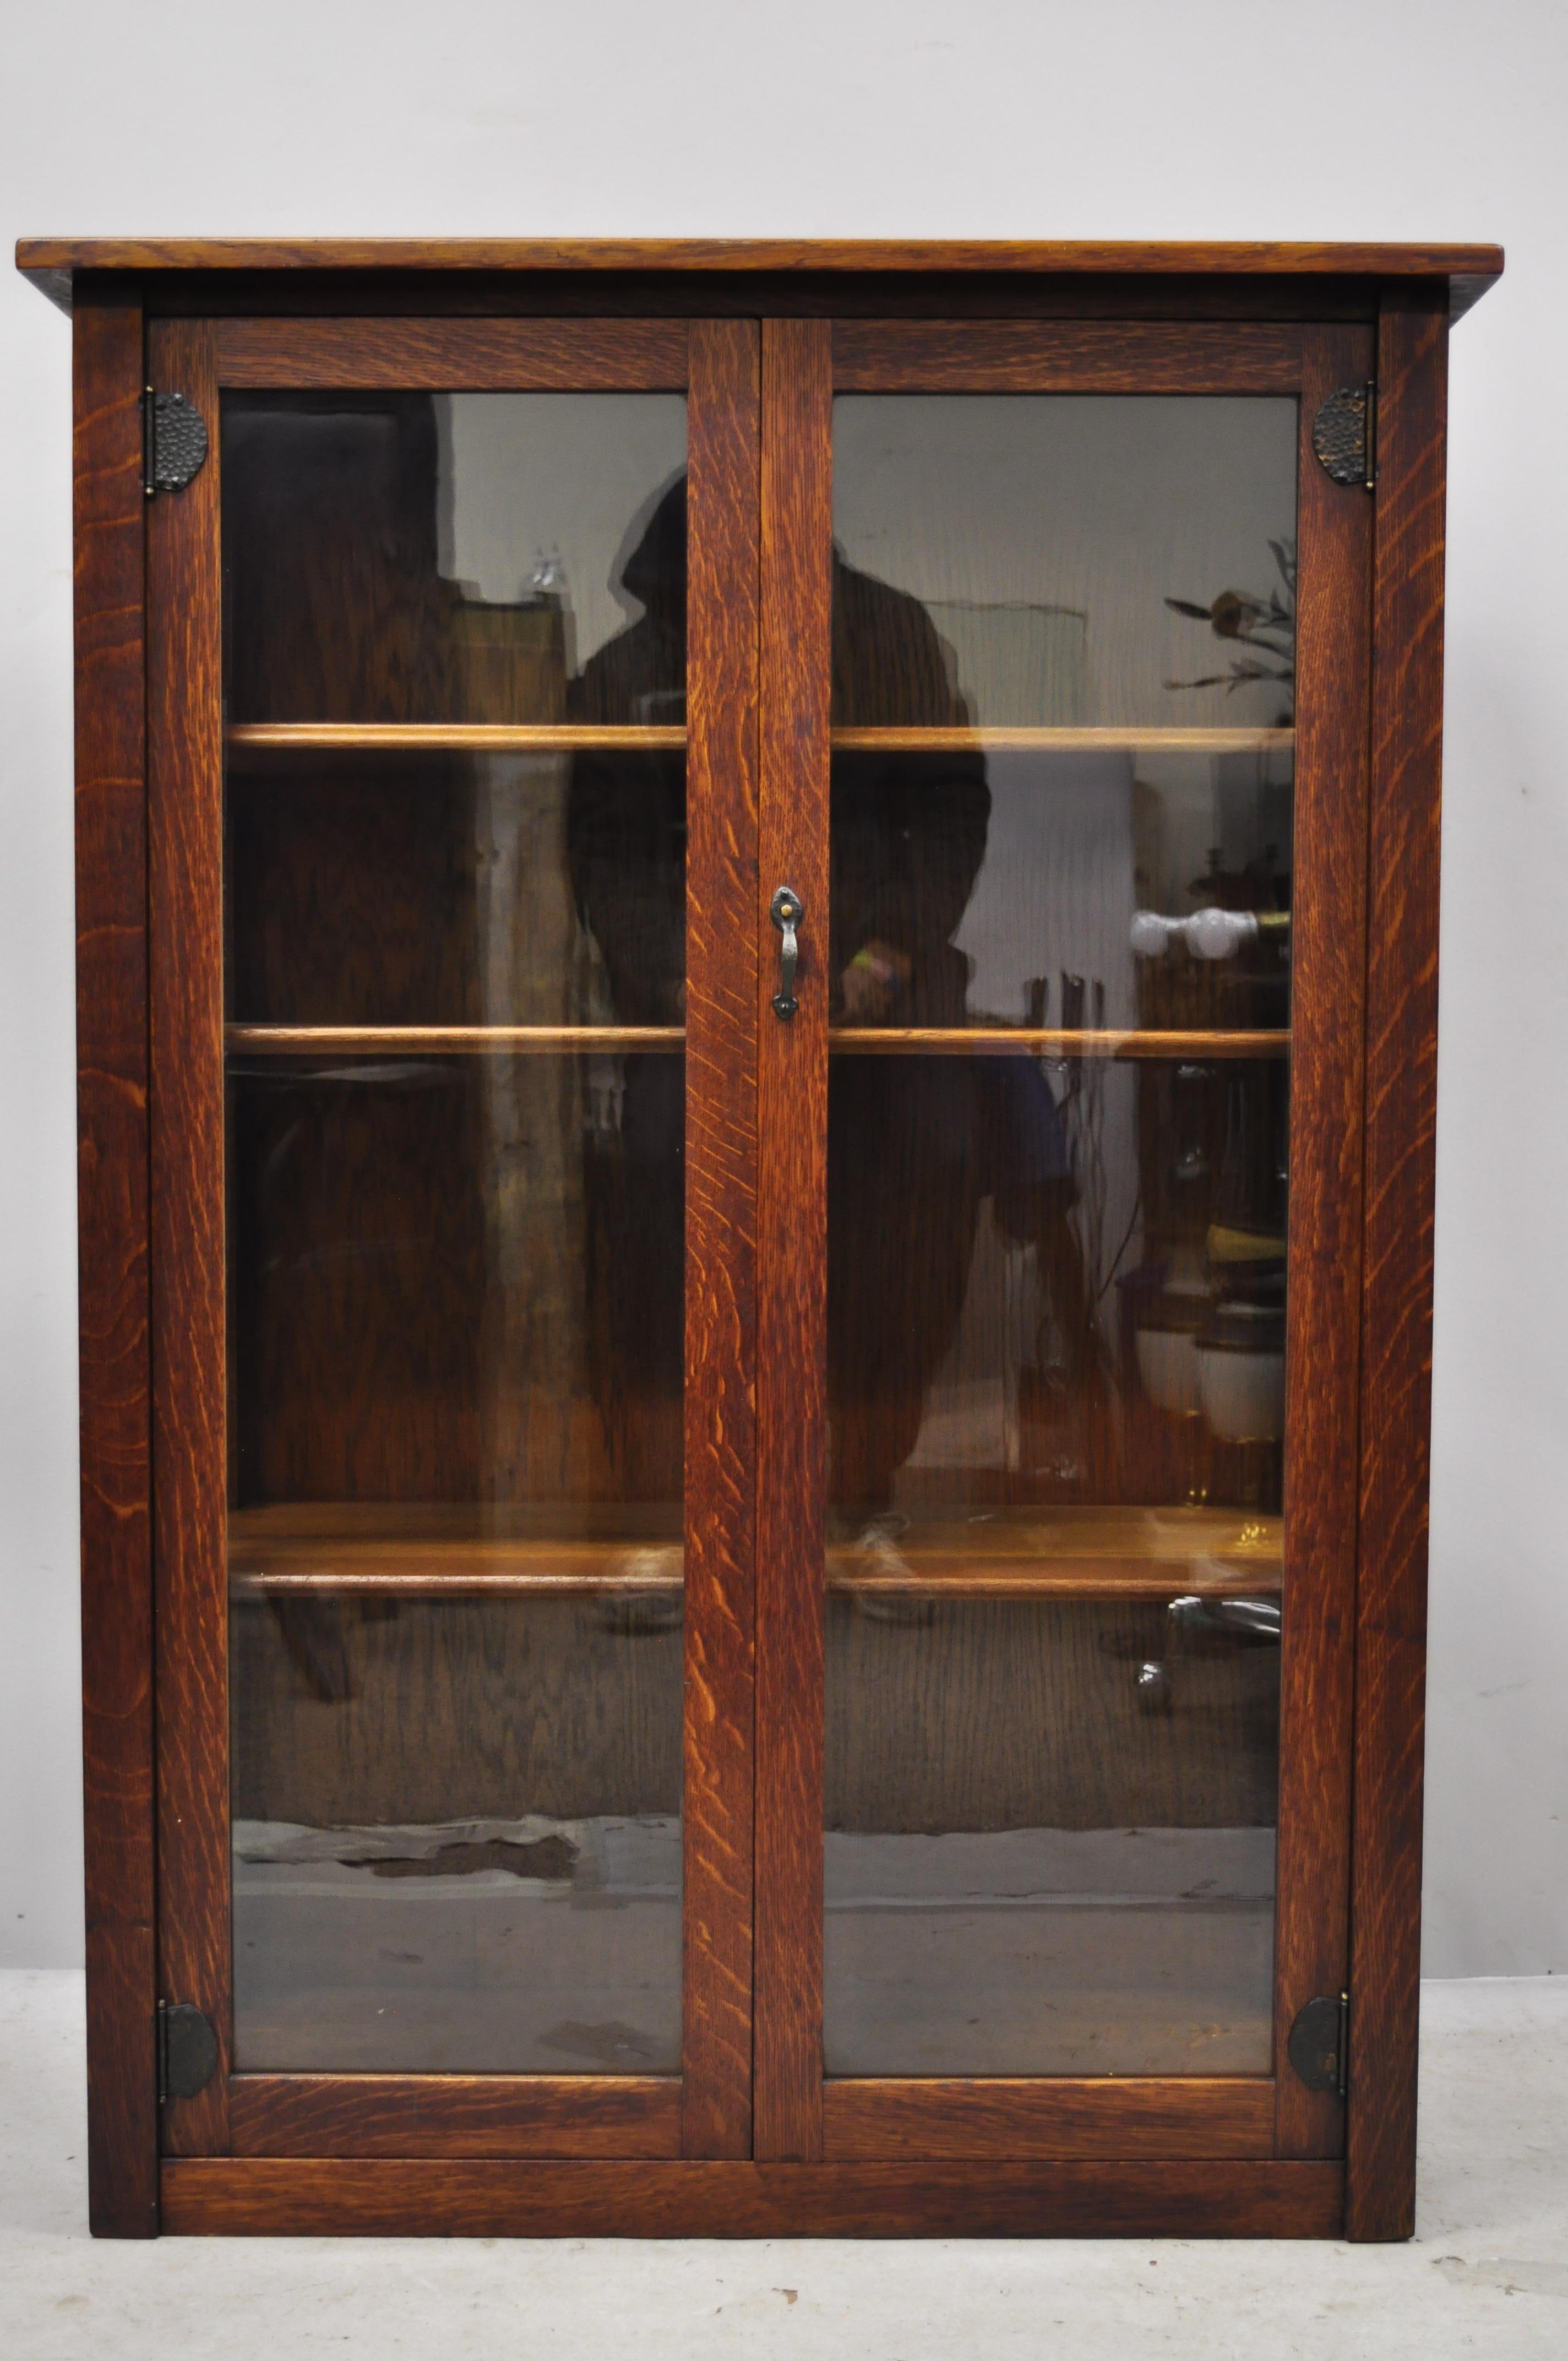 Stickley Brothers Quaint Furniture Mission oak two door bookcase china cabinet. Item features glass panel sides, 2 glass swing doors, hand hammered copper hinges, solid oak wood construction, 2 glass swing doors, original label, 3 adjustable